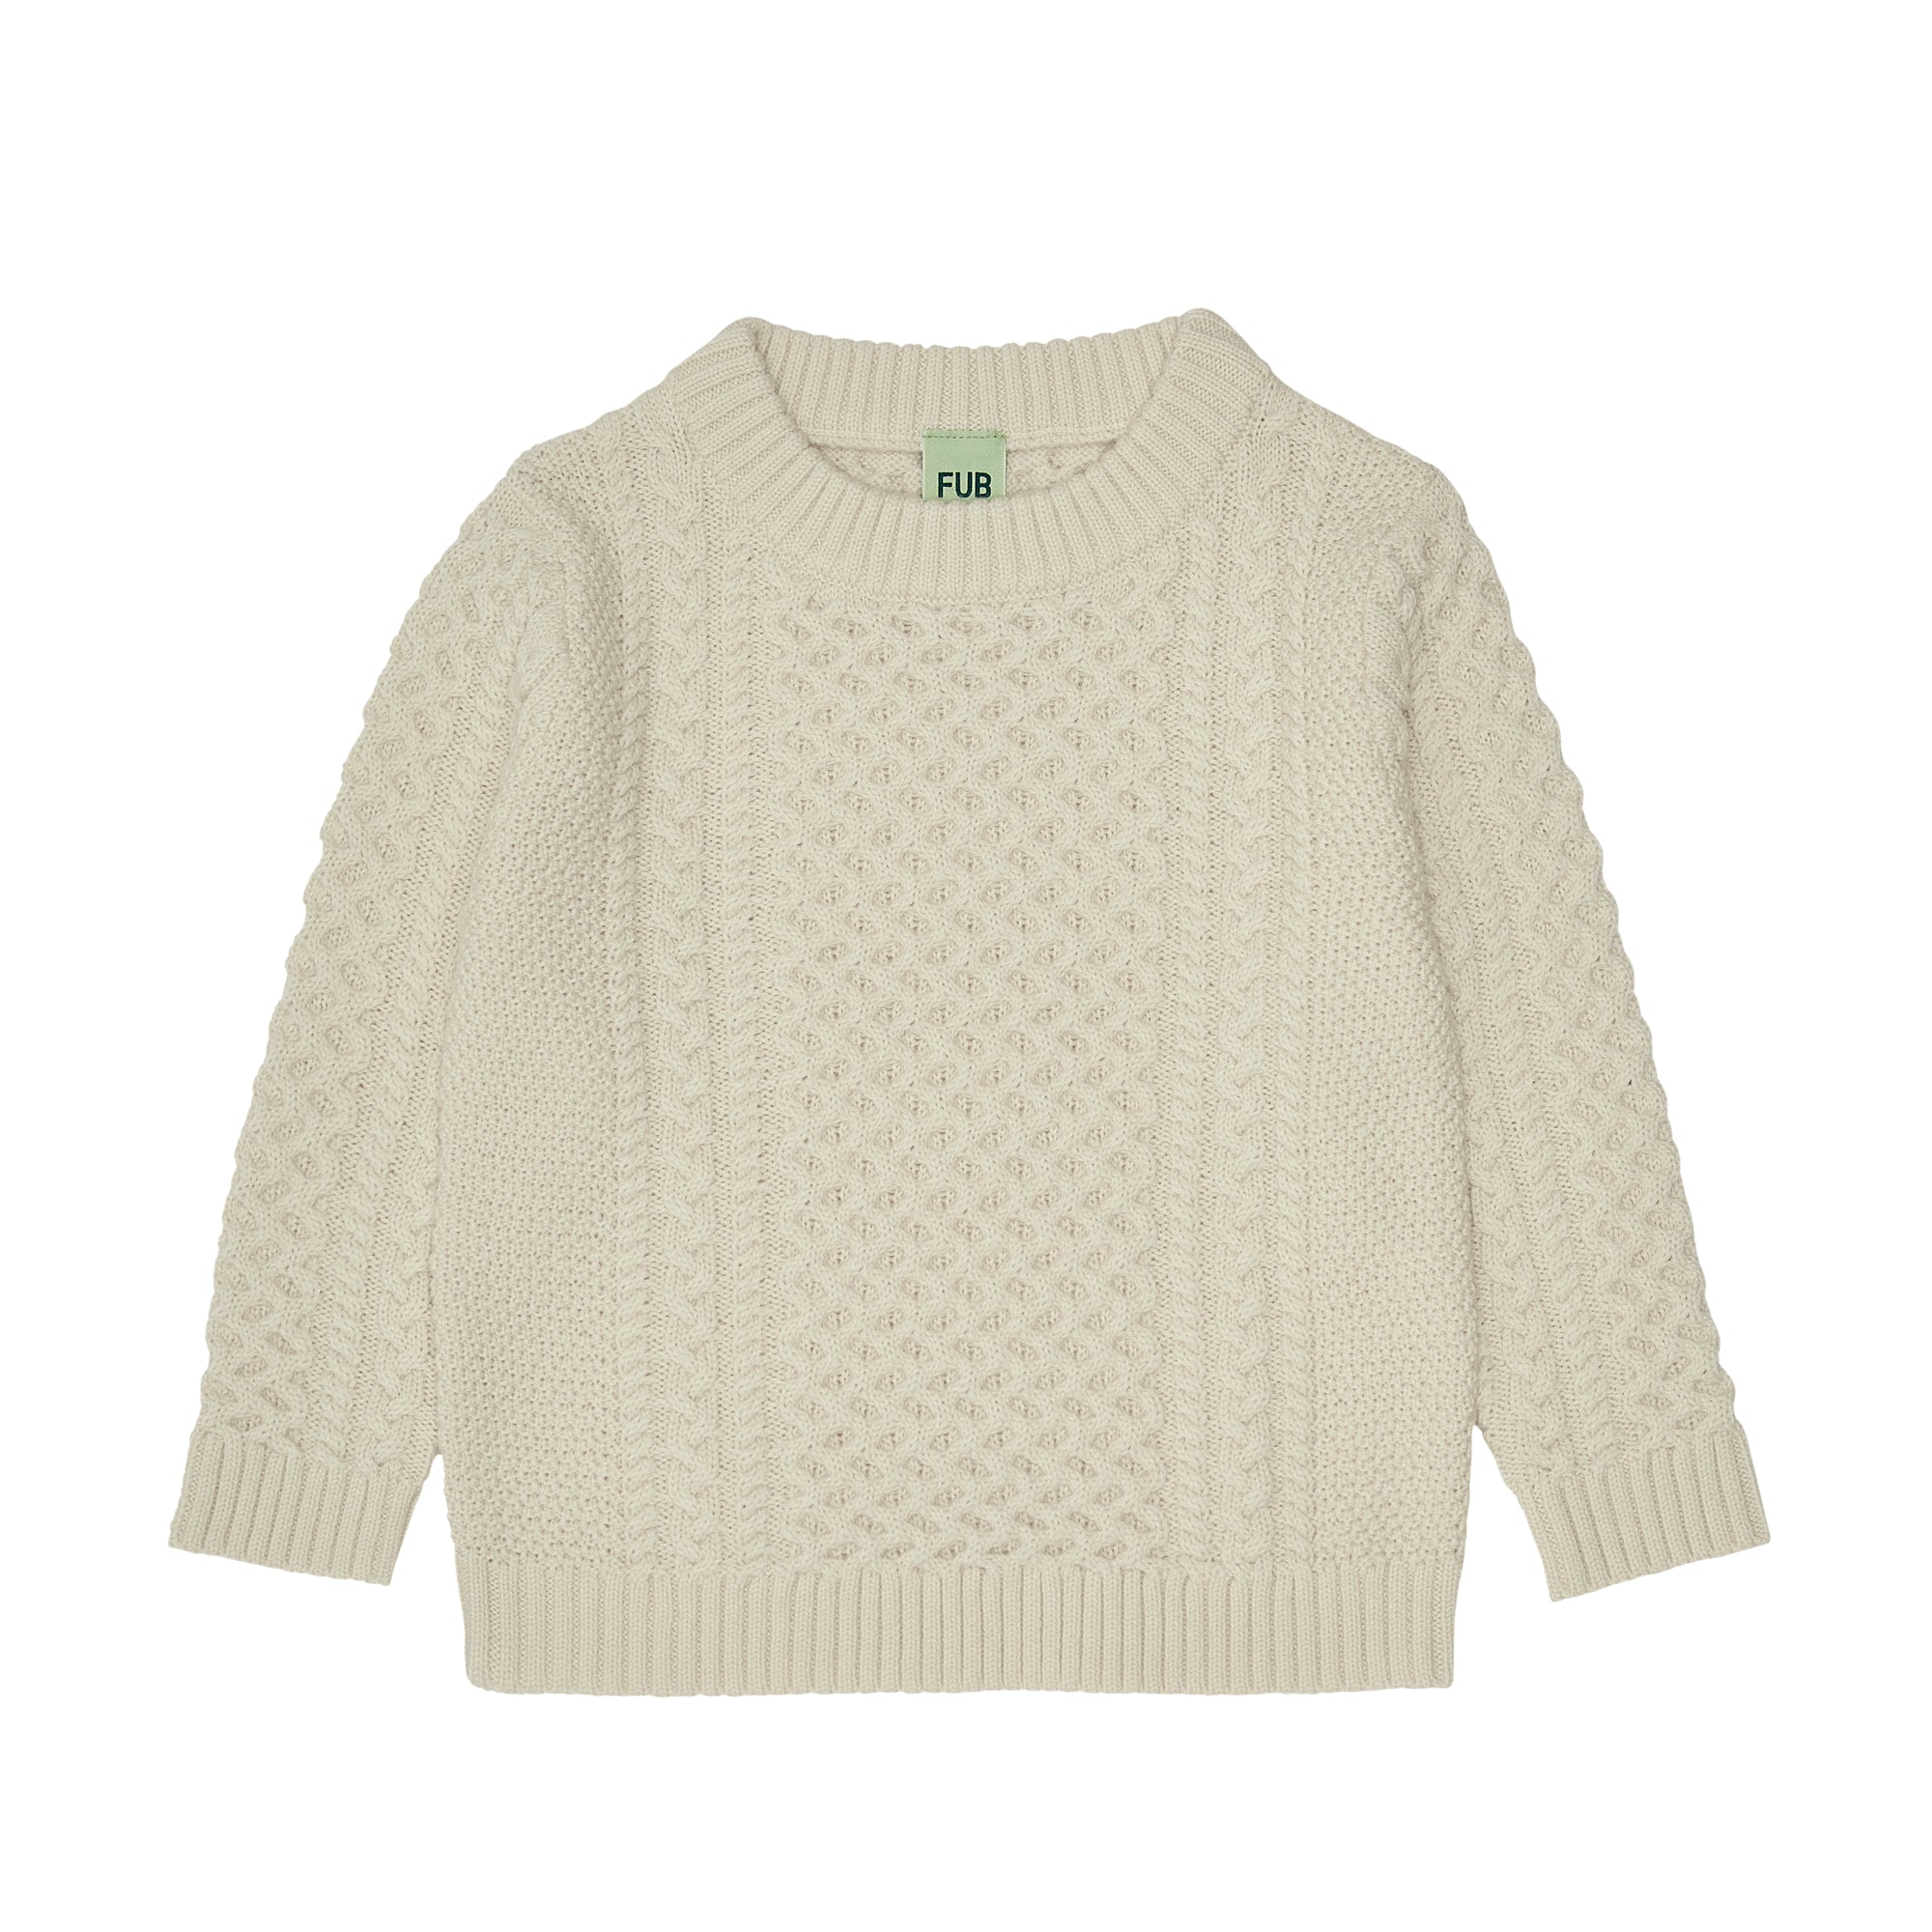 STRUCTURE SWEATER - LITTLE IVY